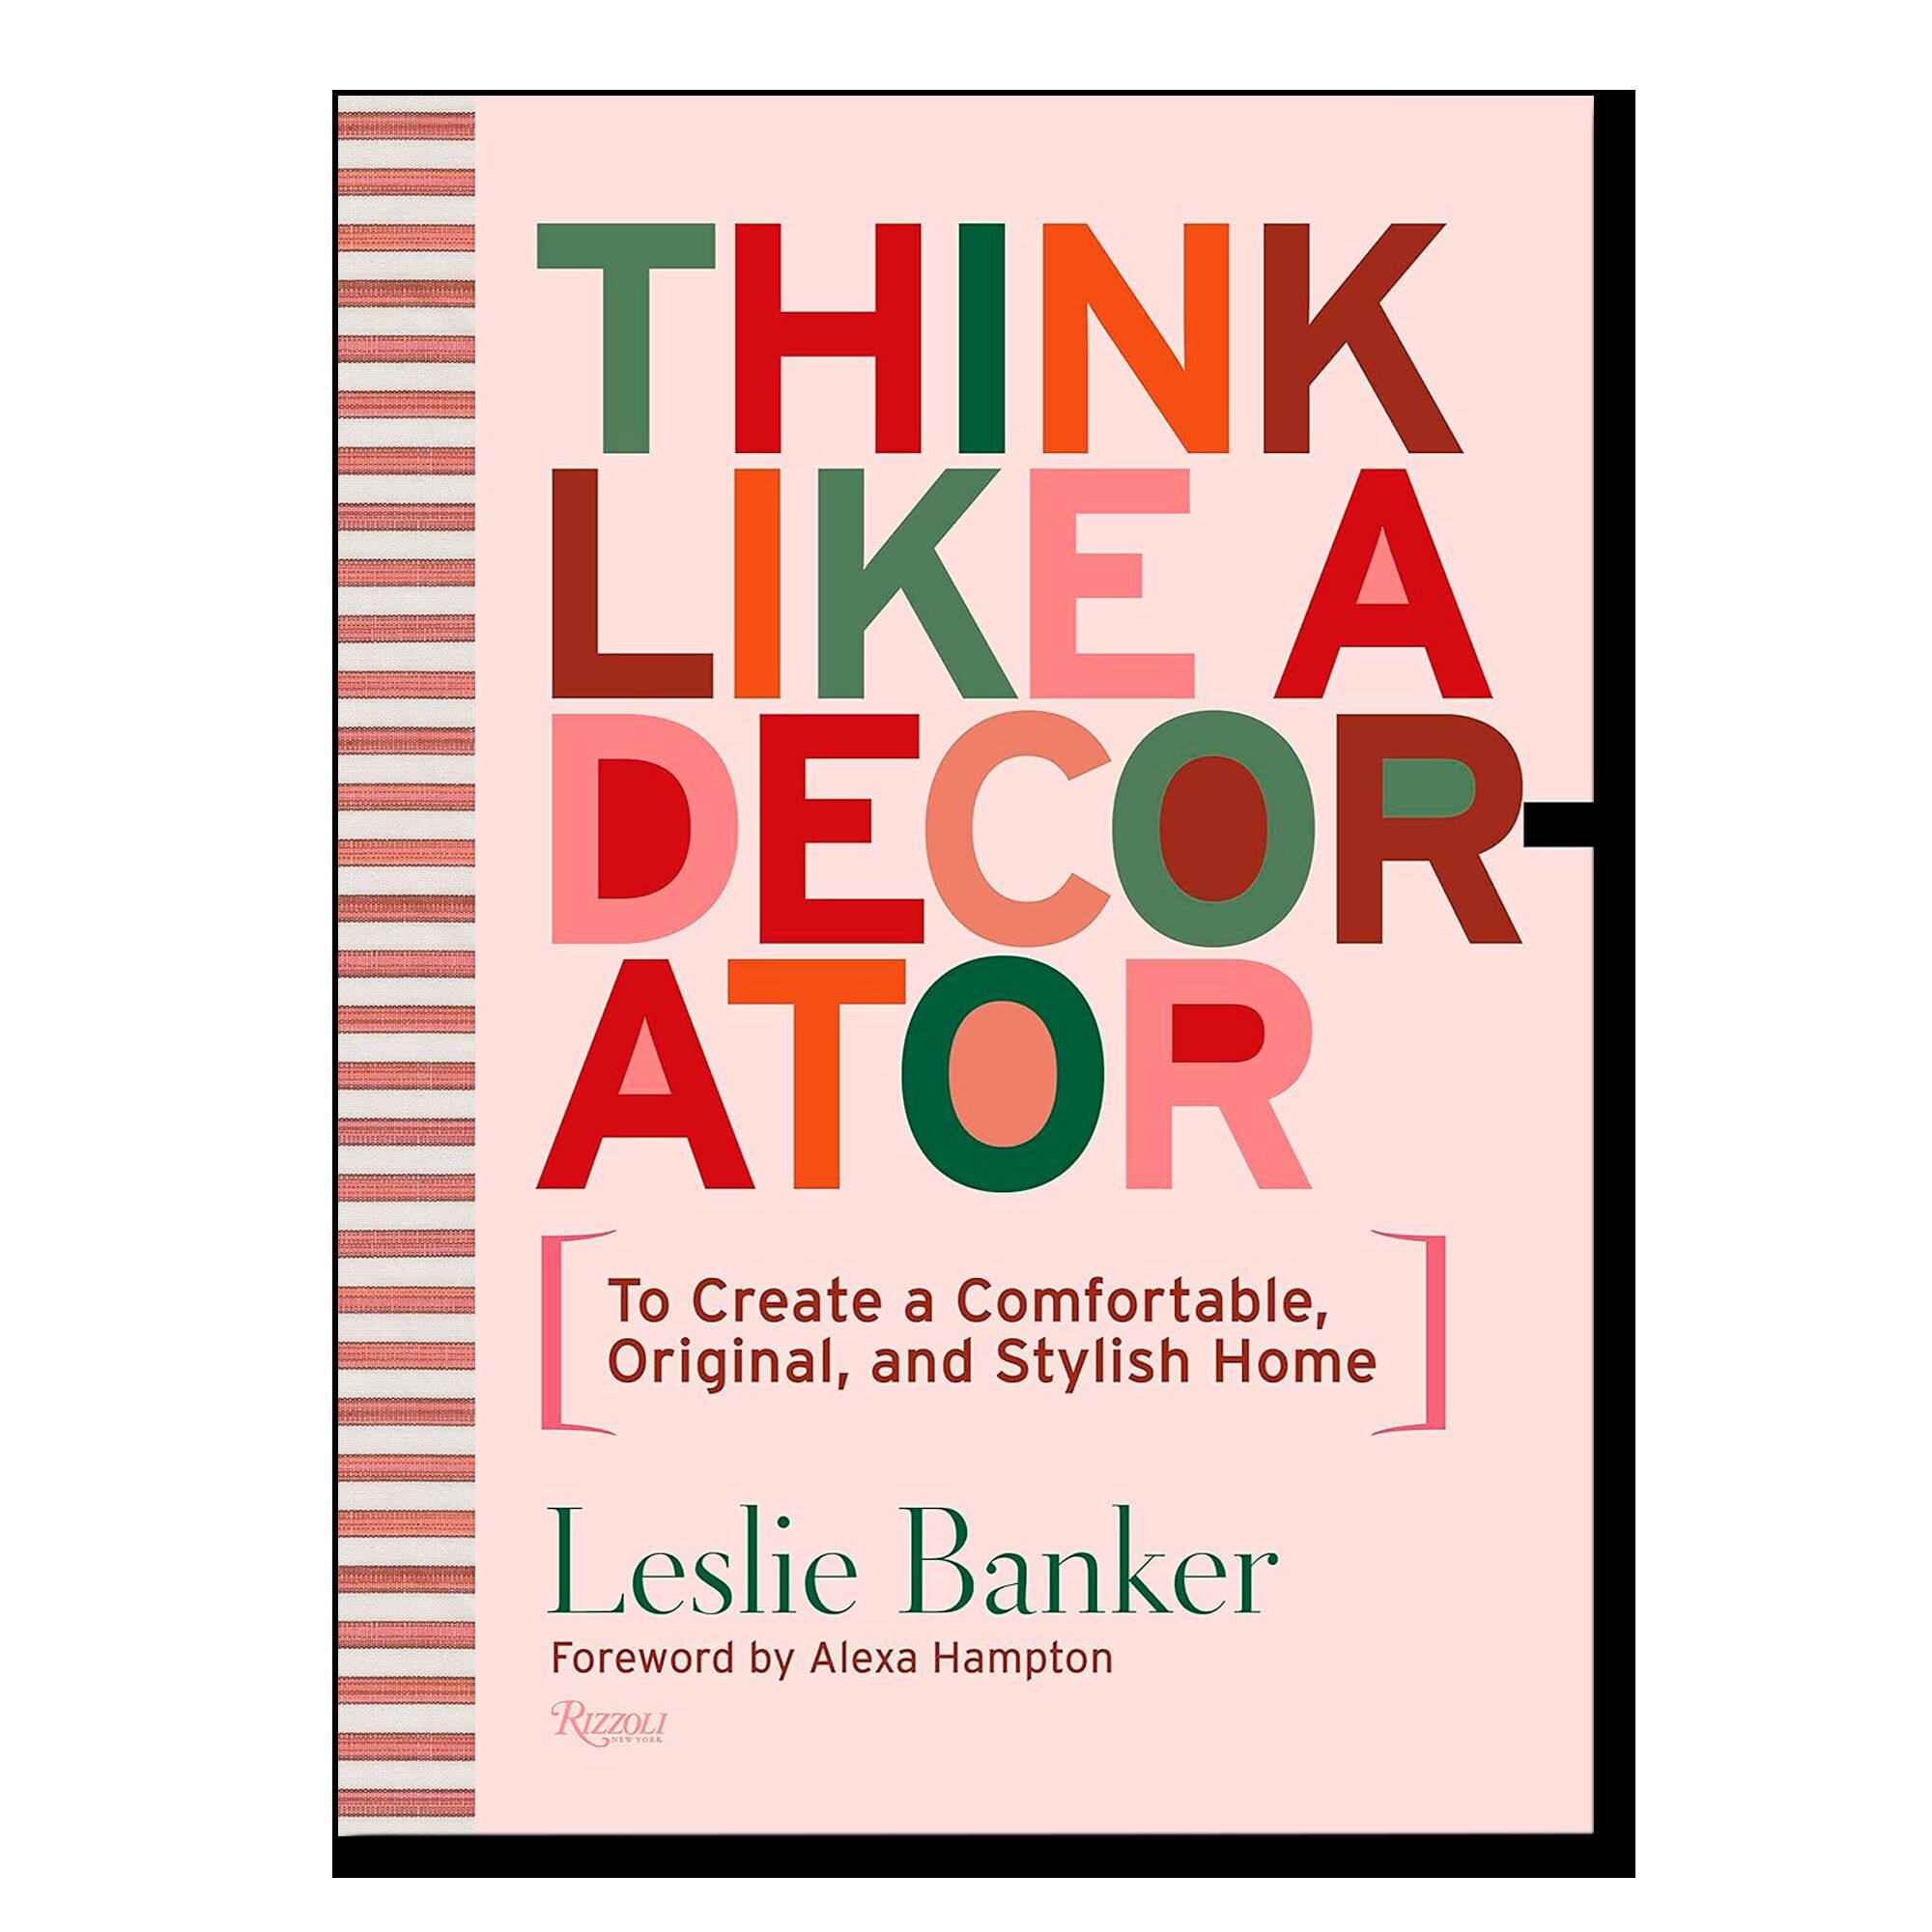 Think Like A Decorator: To Create a Comfortable, Original, and Stylish Home